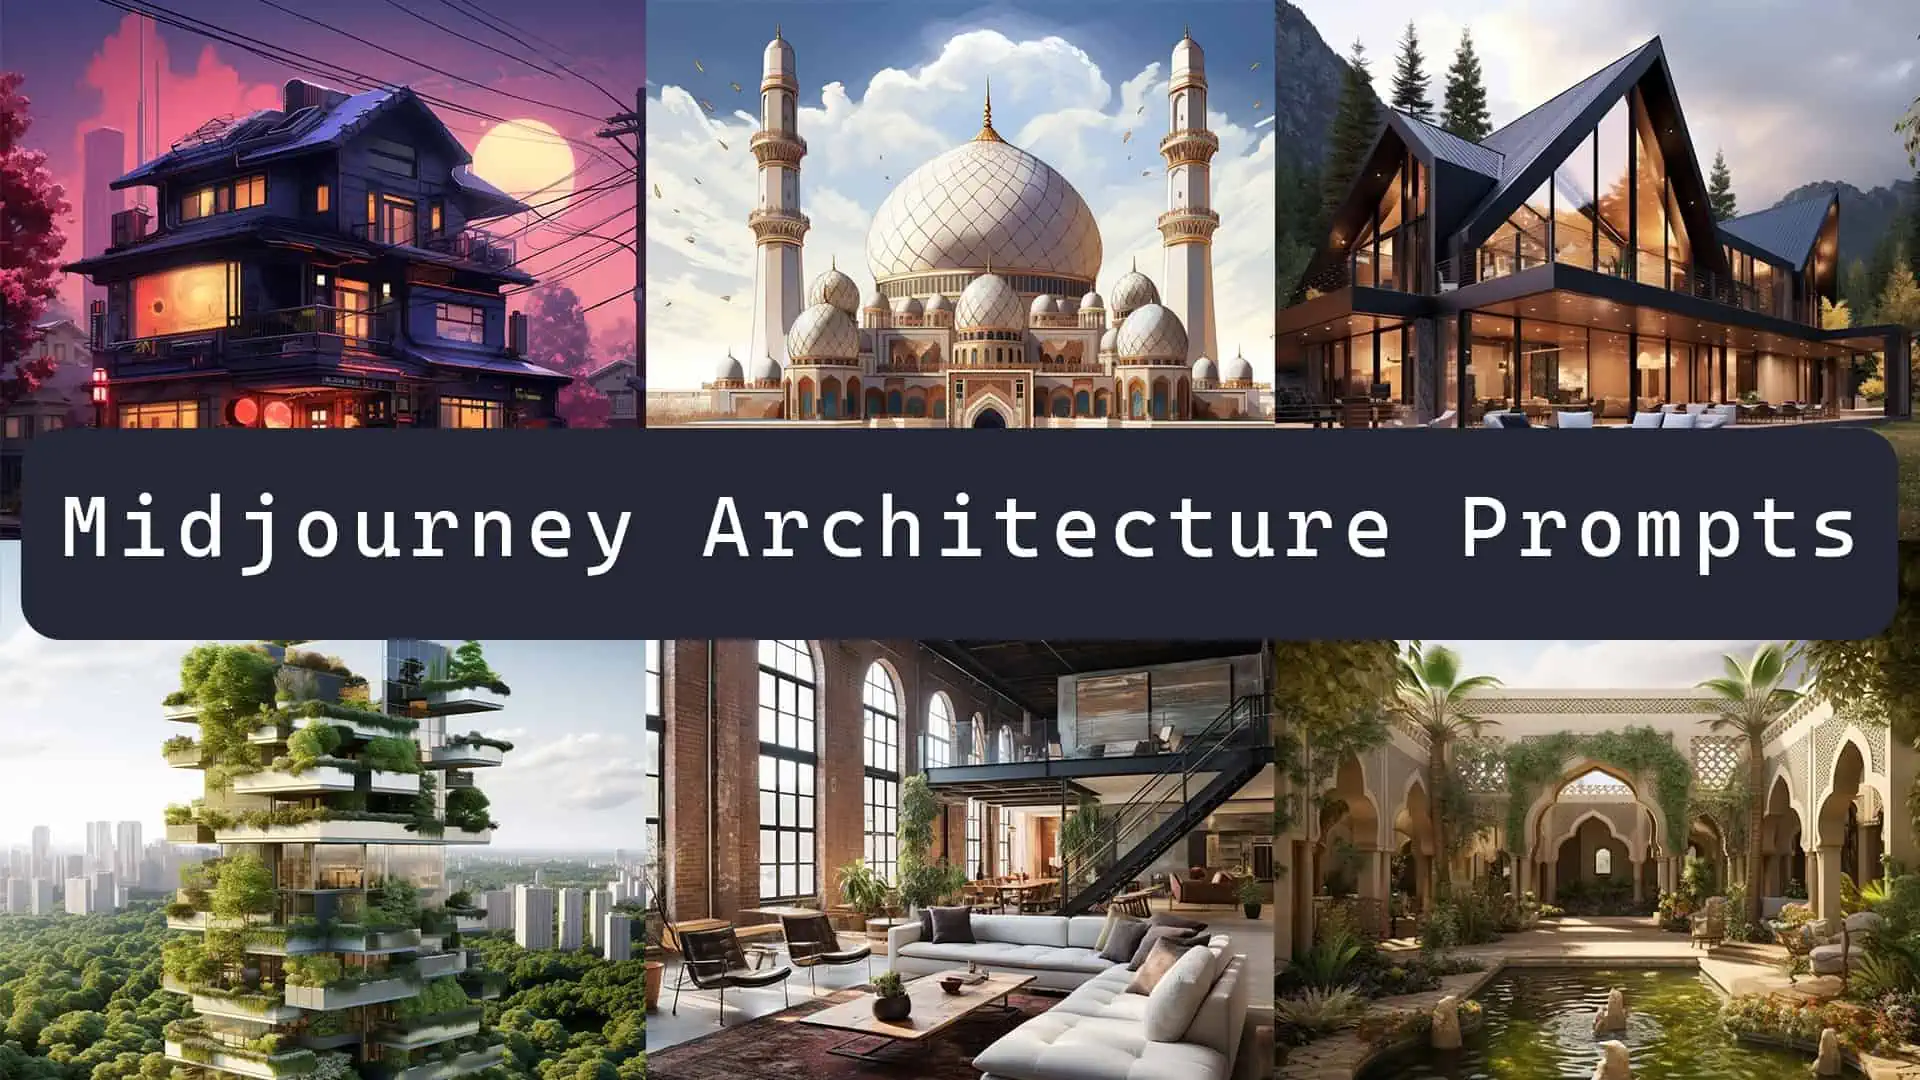 The Best Midjourney prompts for Architecture